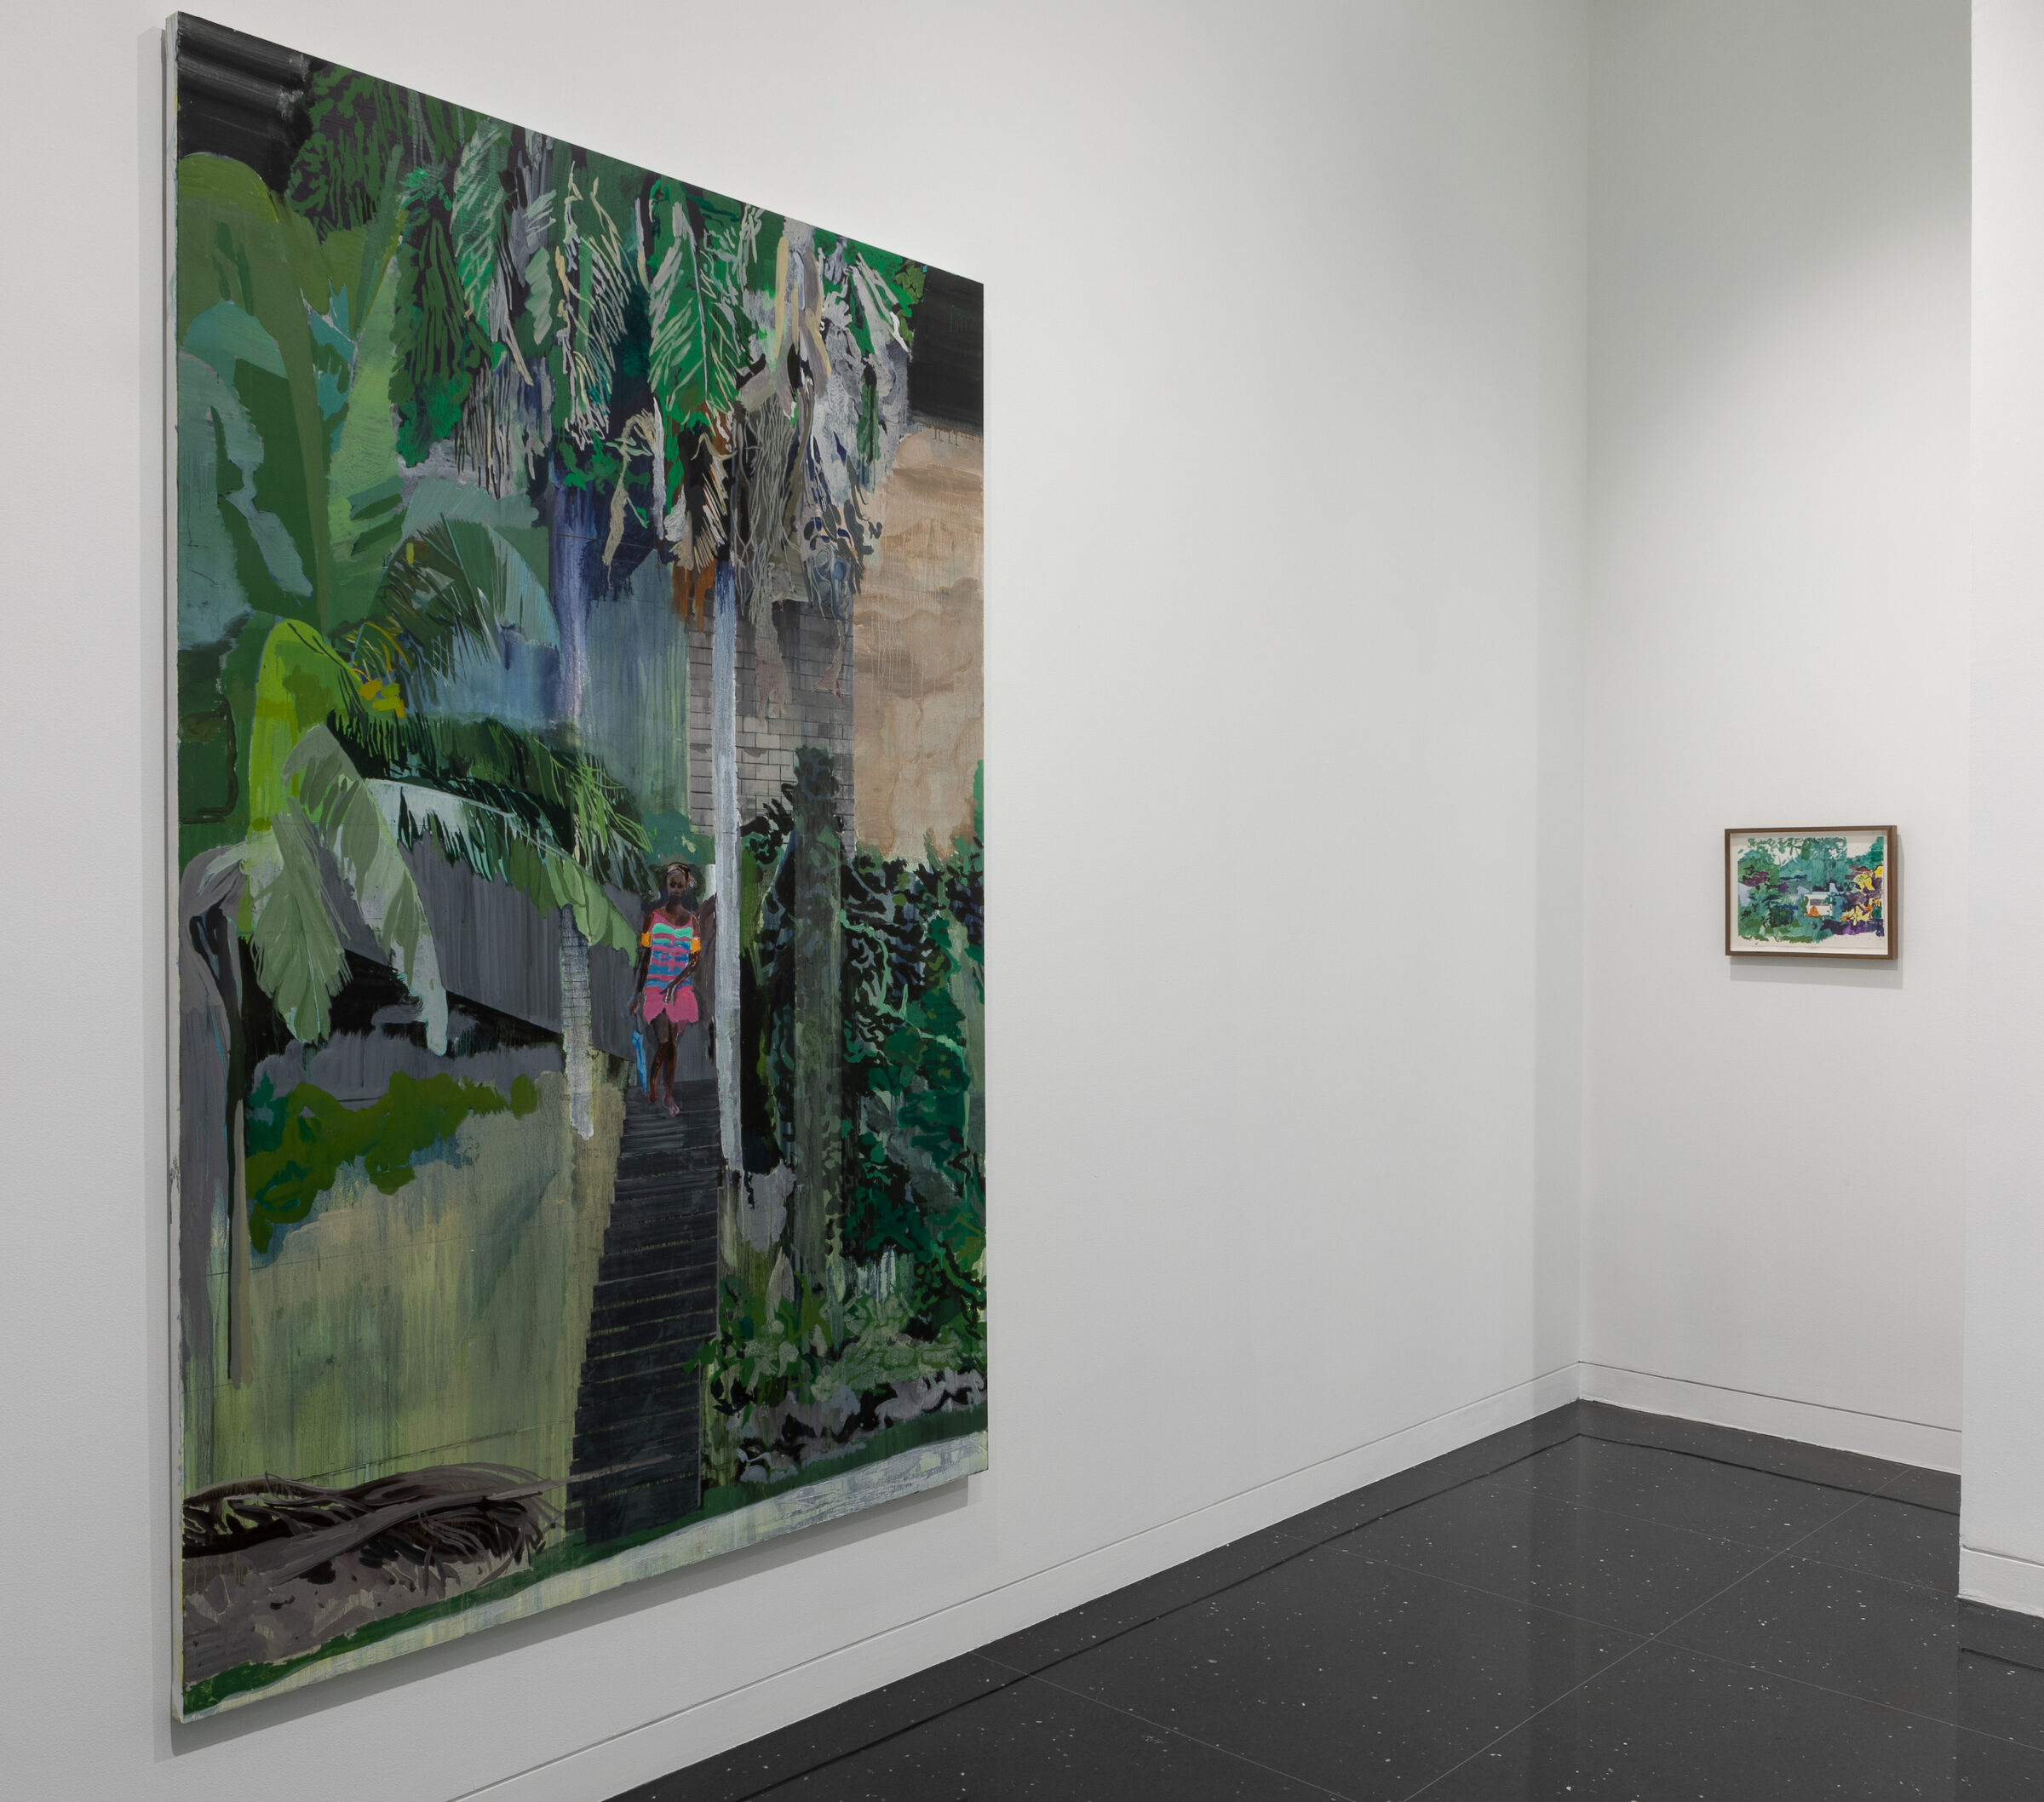 A small alcove in a white gallery in which hangs a small framed painting to the right and a large unframed painting of a young Black woman amidst a leafy, tropical landscape to the left.